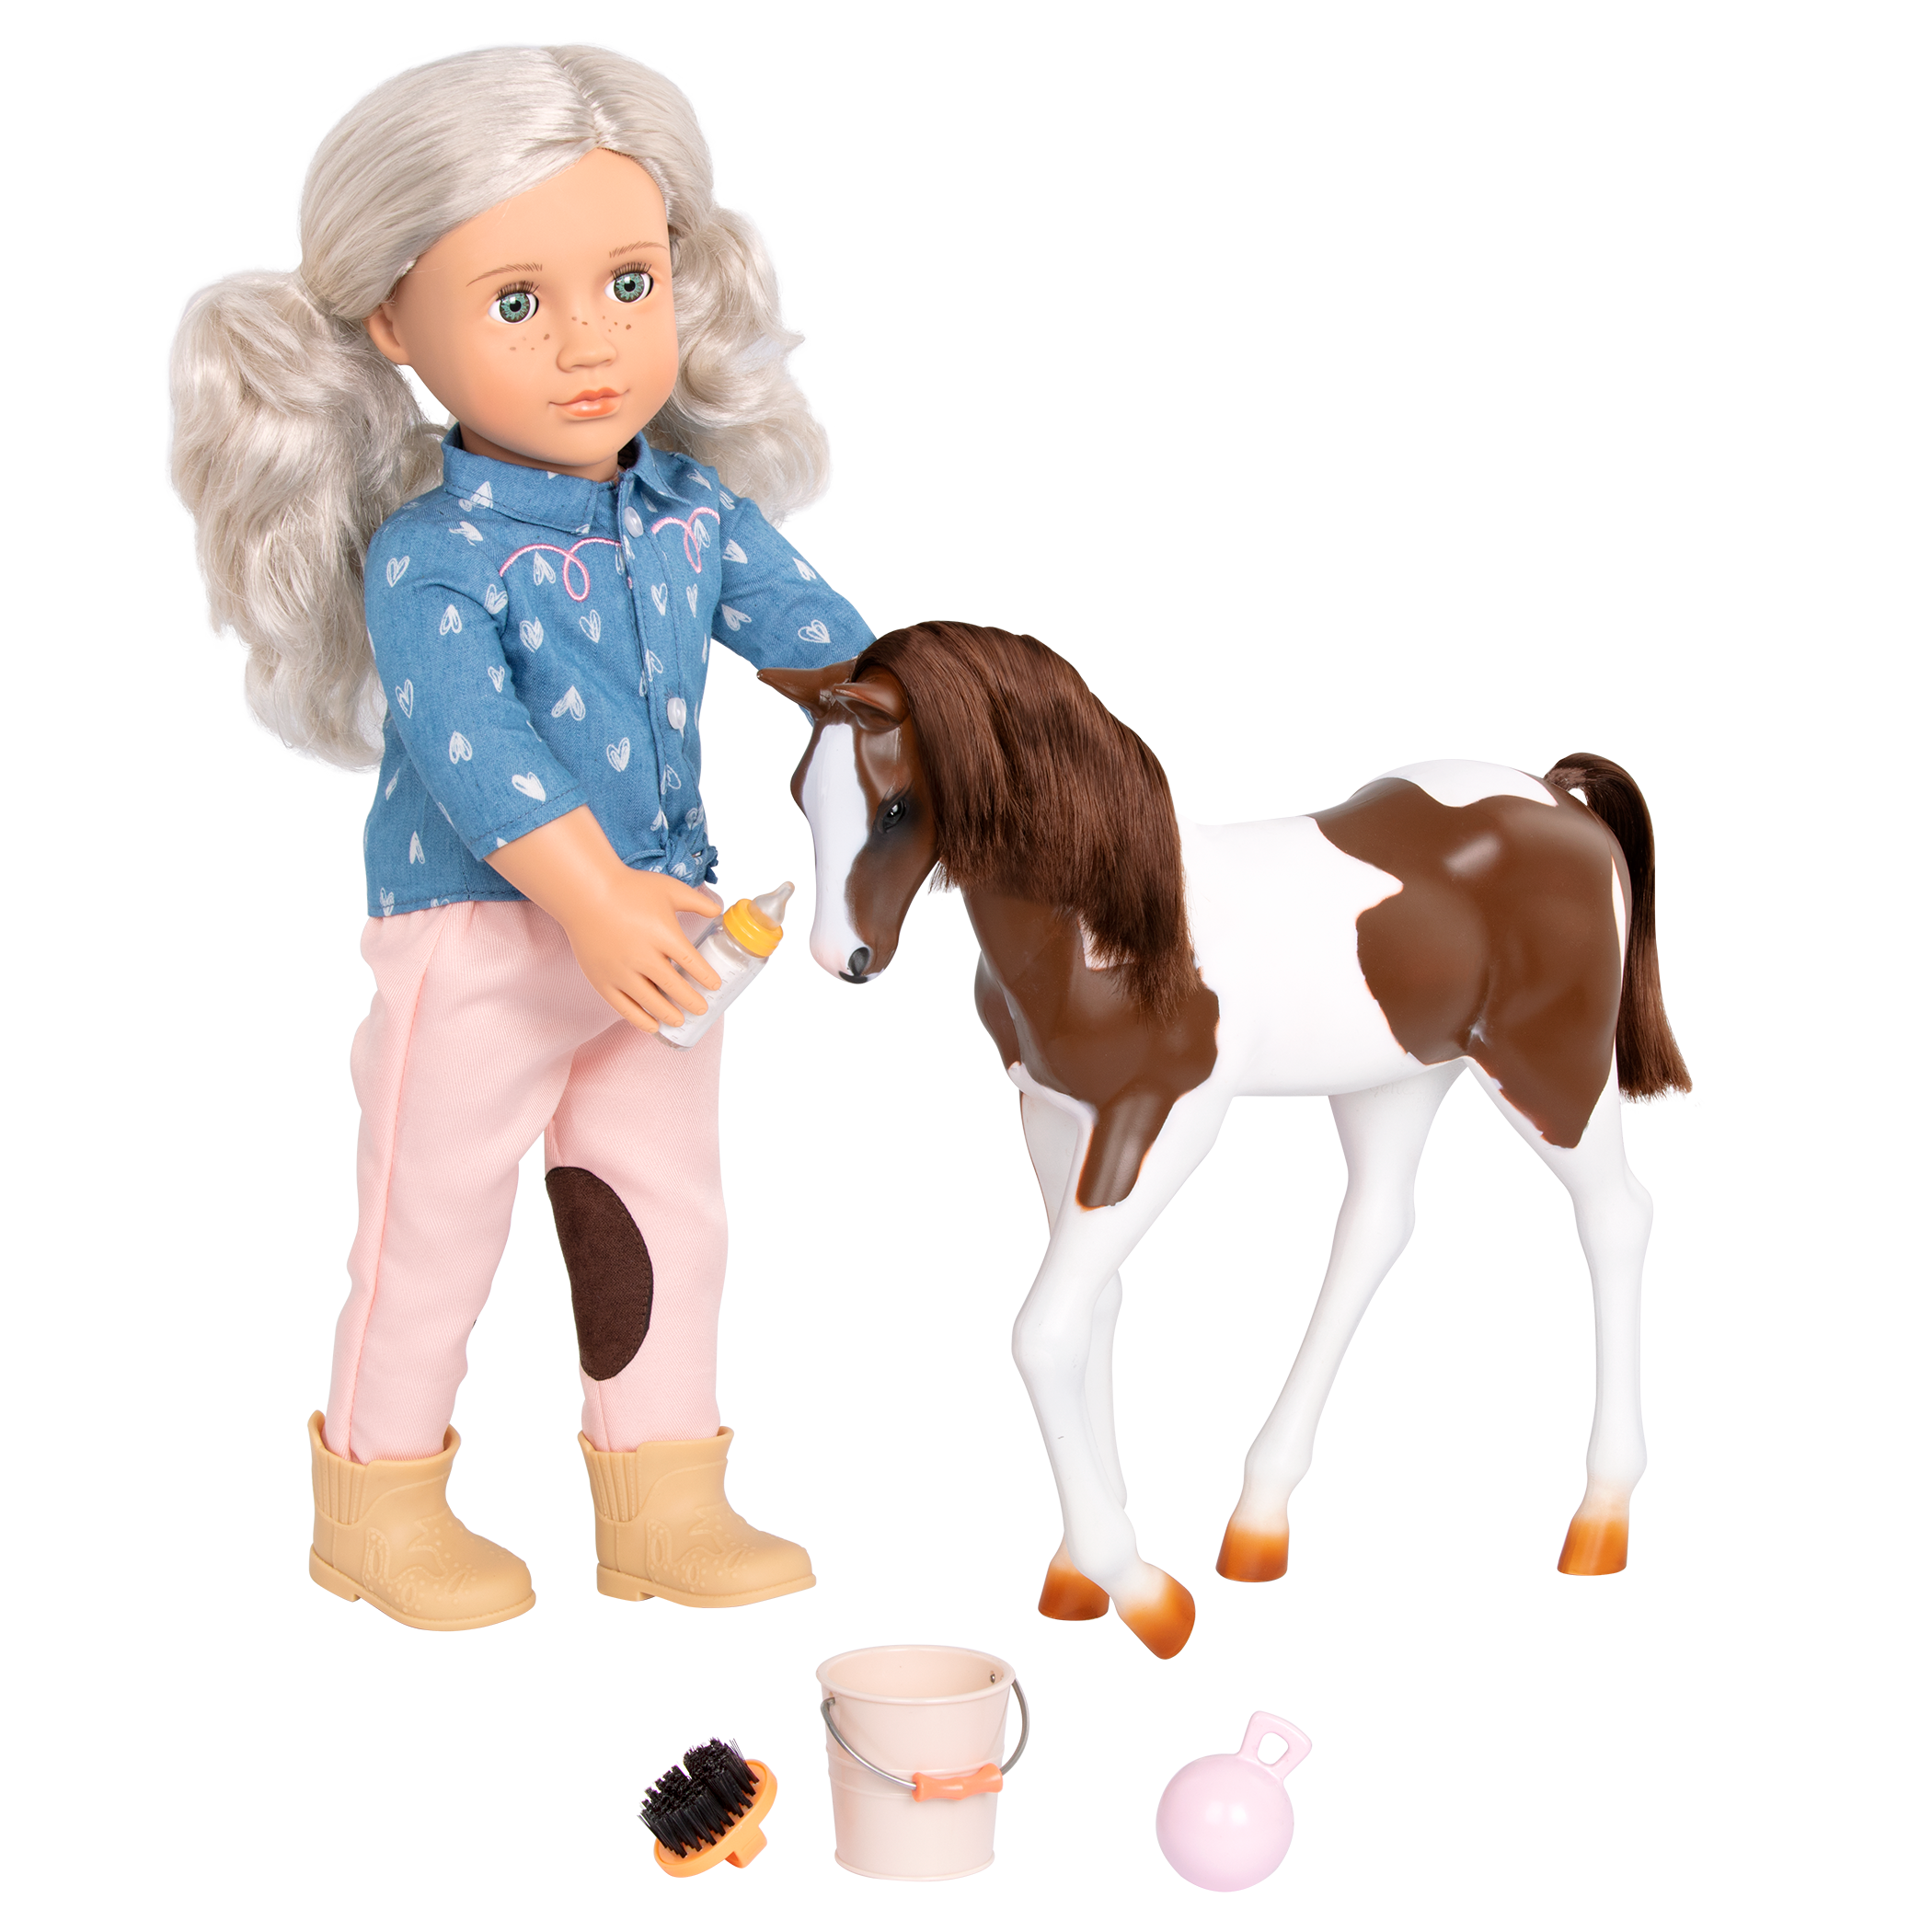 18-inch doll with silver hair, green eyes, horse accessories and toy foal